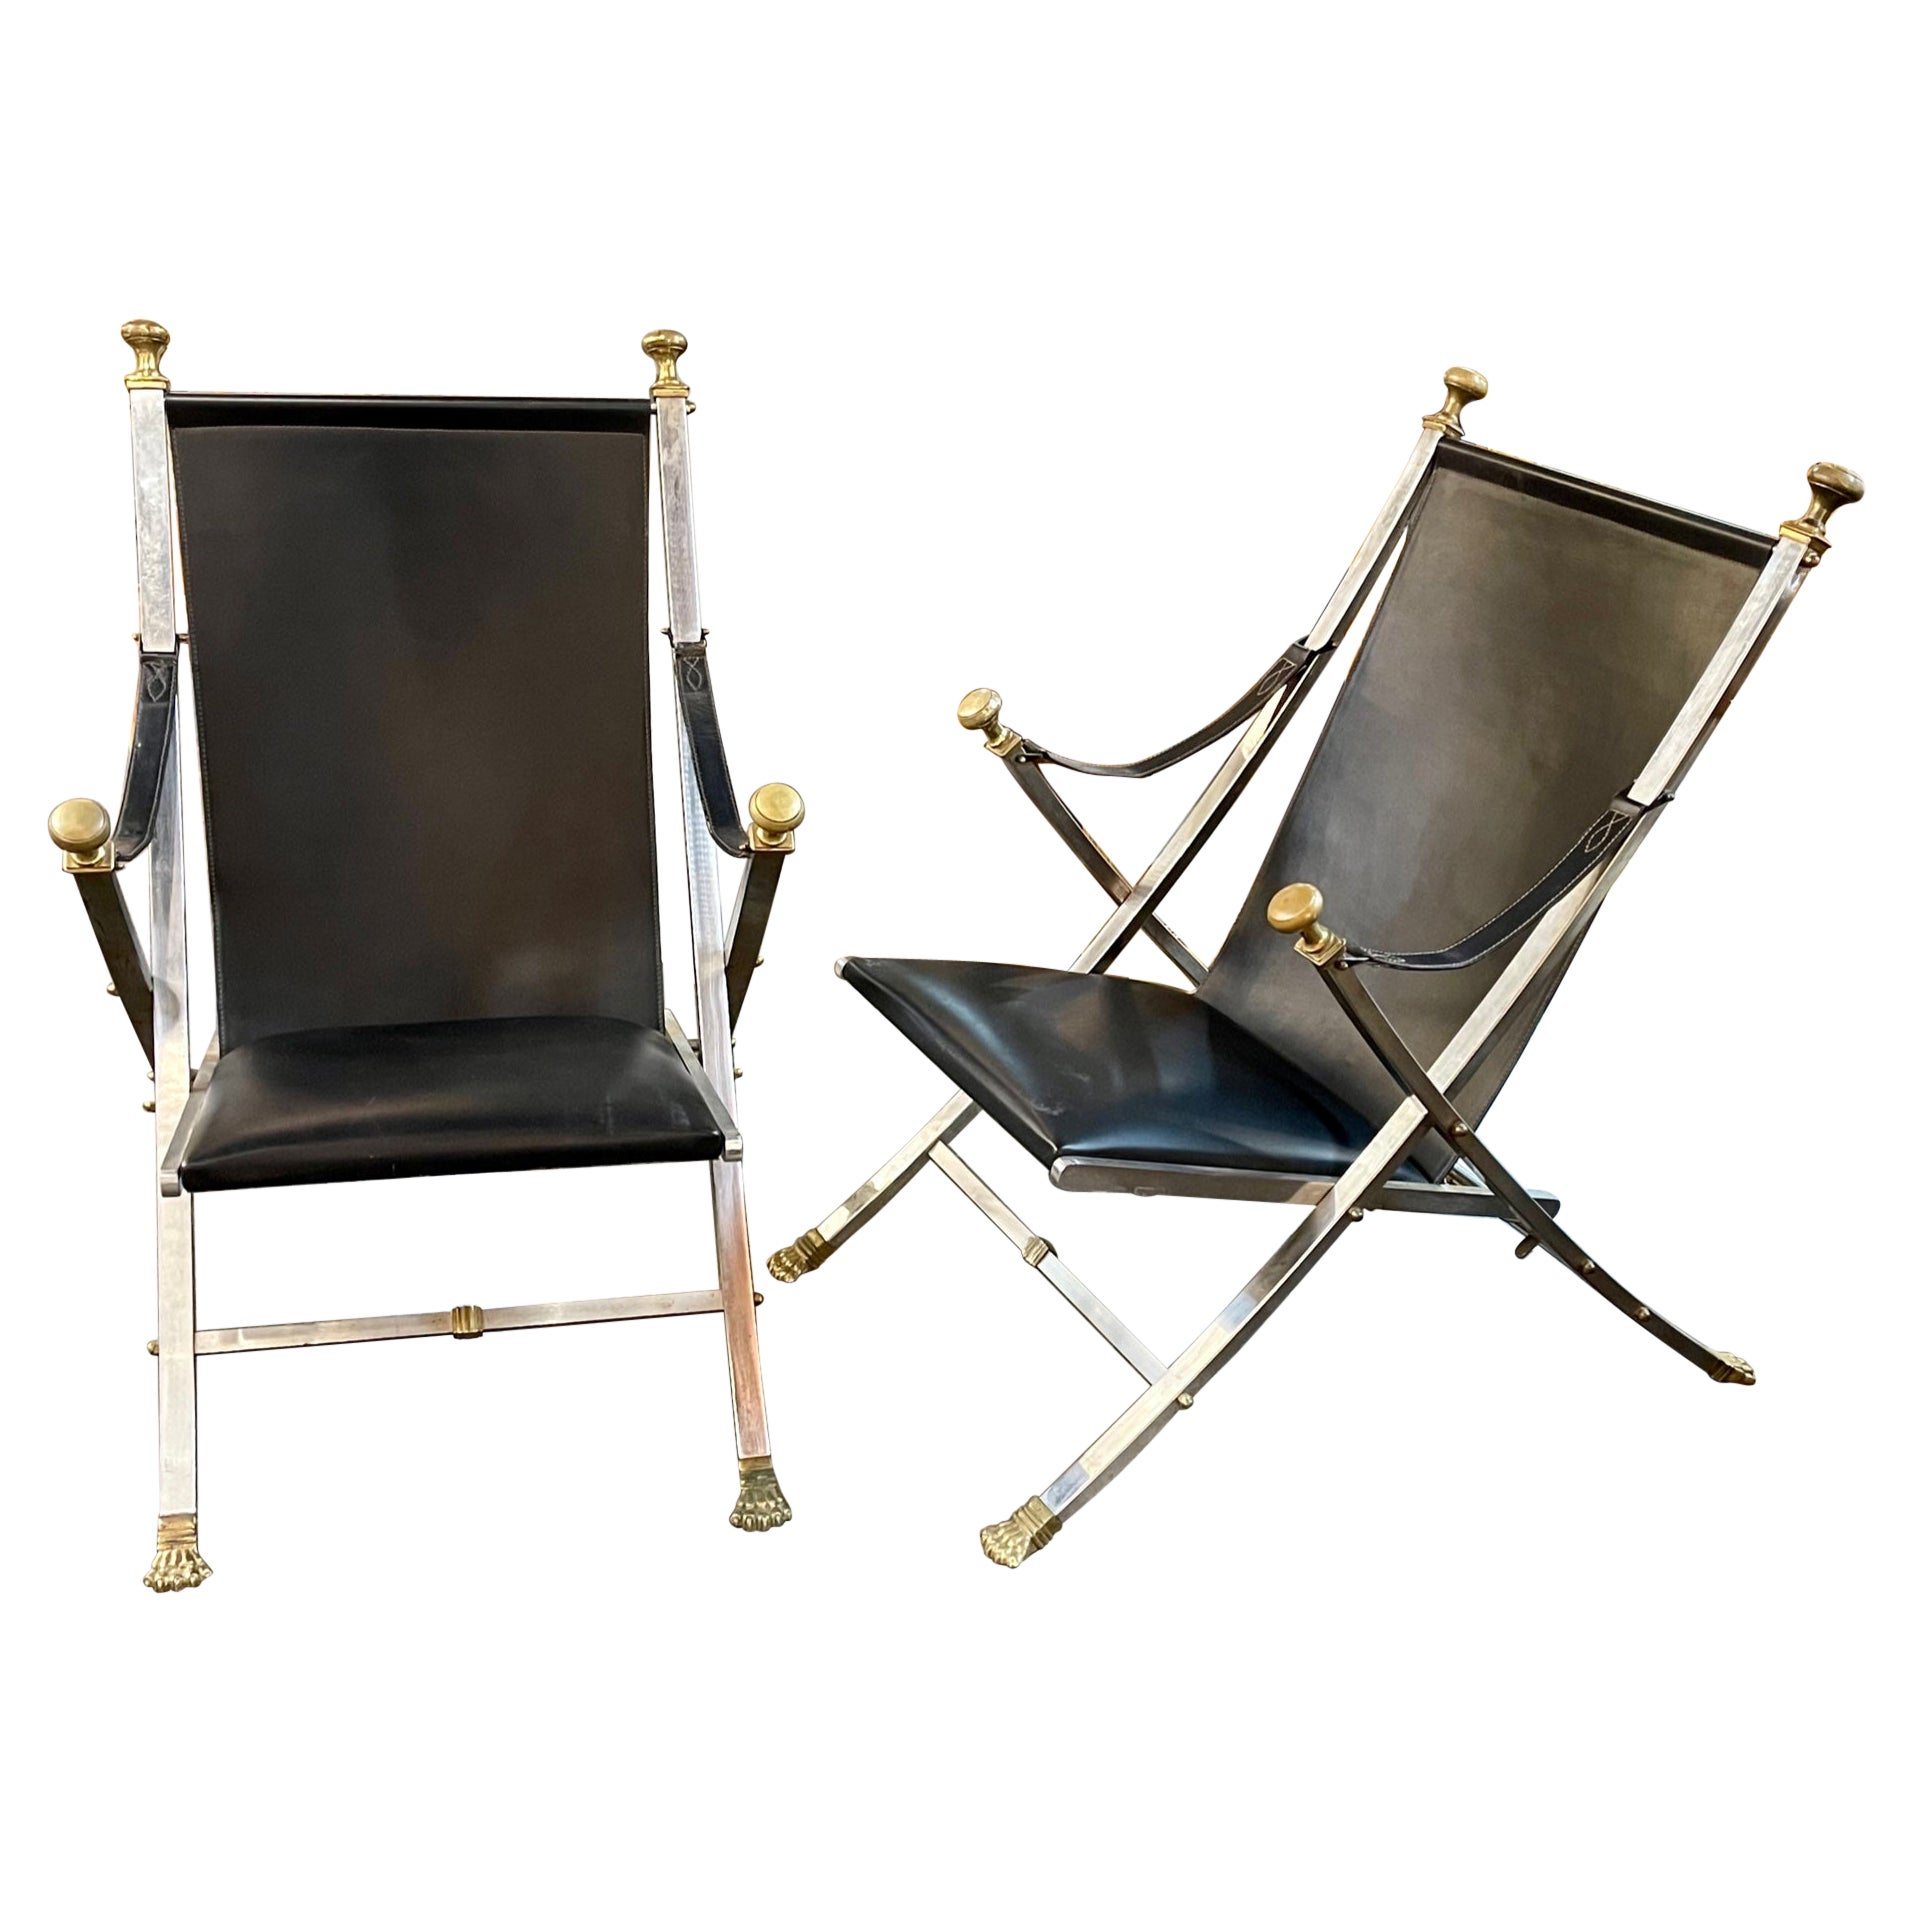 Rare Pair of French Maison Jansen Folding Chairs For Sale